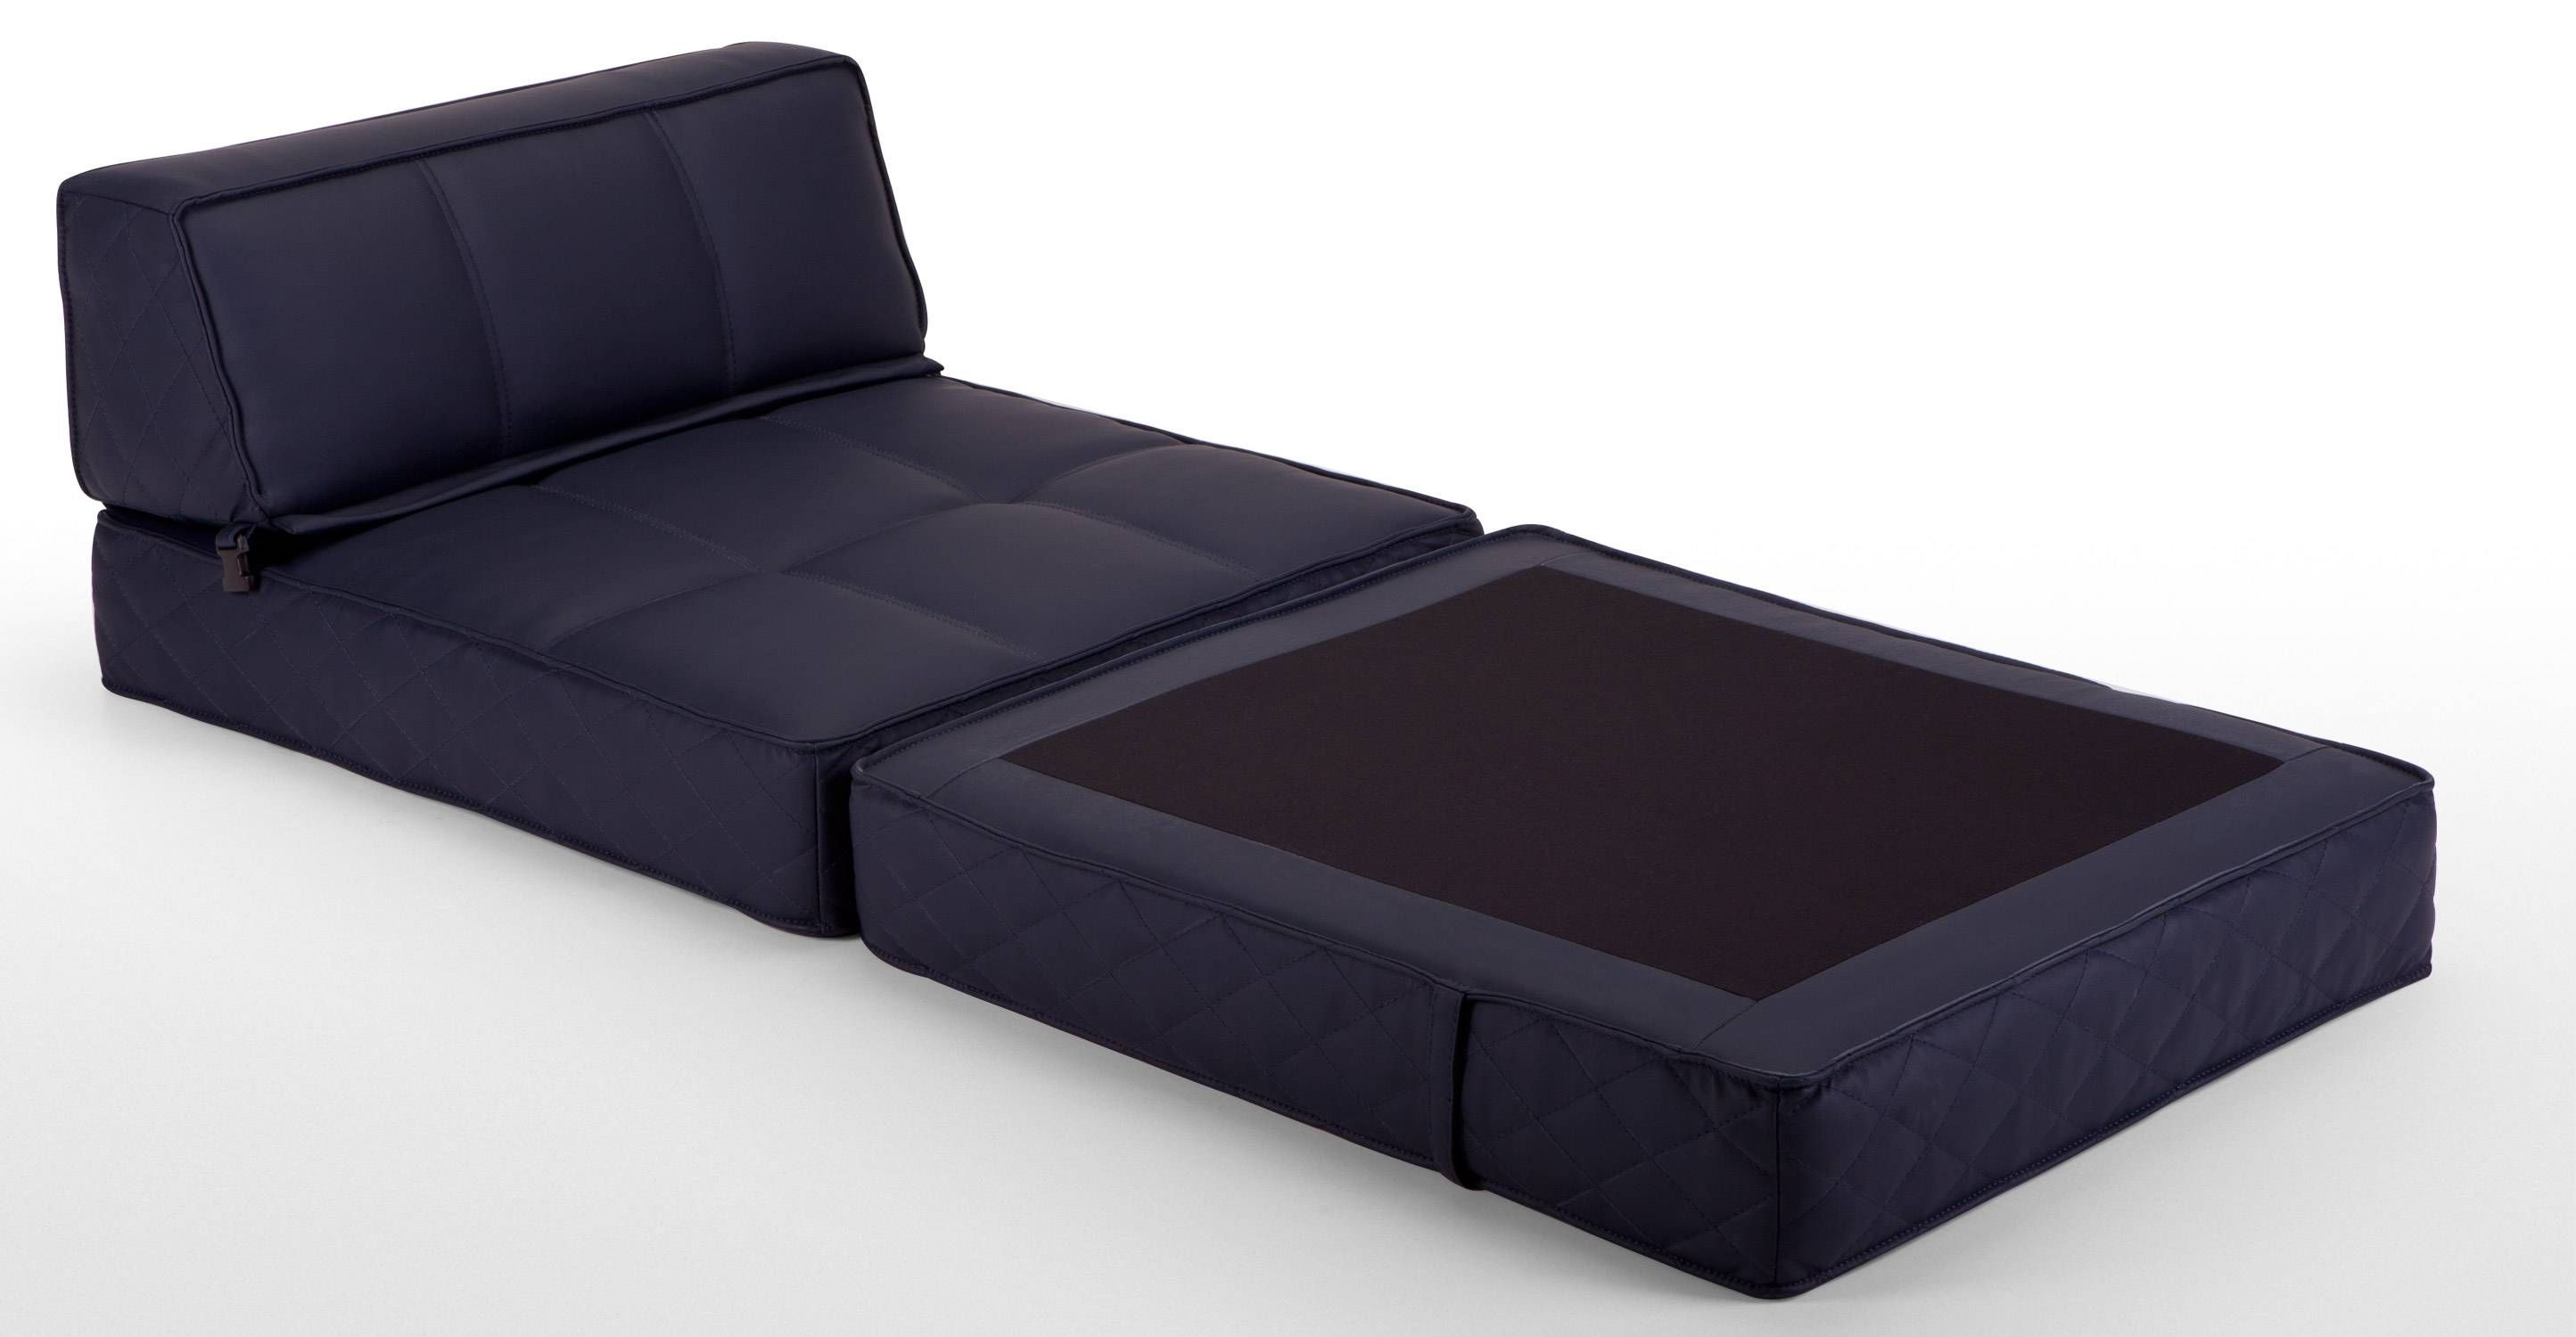 Fold Up Sofa With Room Foldable Leather Faux Down Futon Couch Intended For Fold Up Sofa Chairs (View 4 of 15)